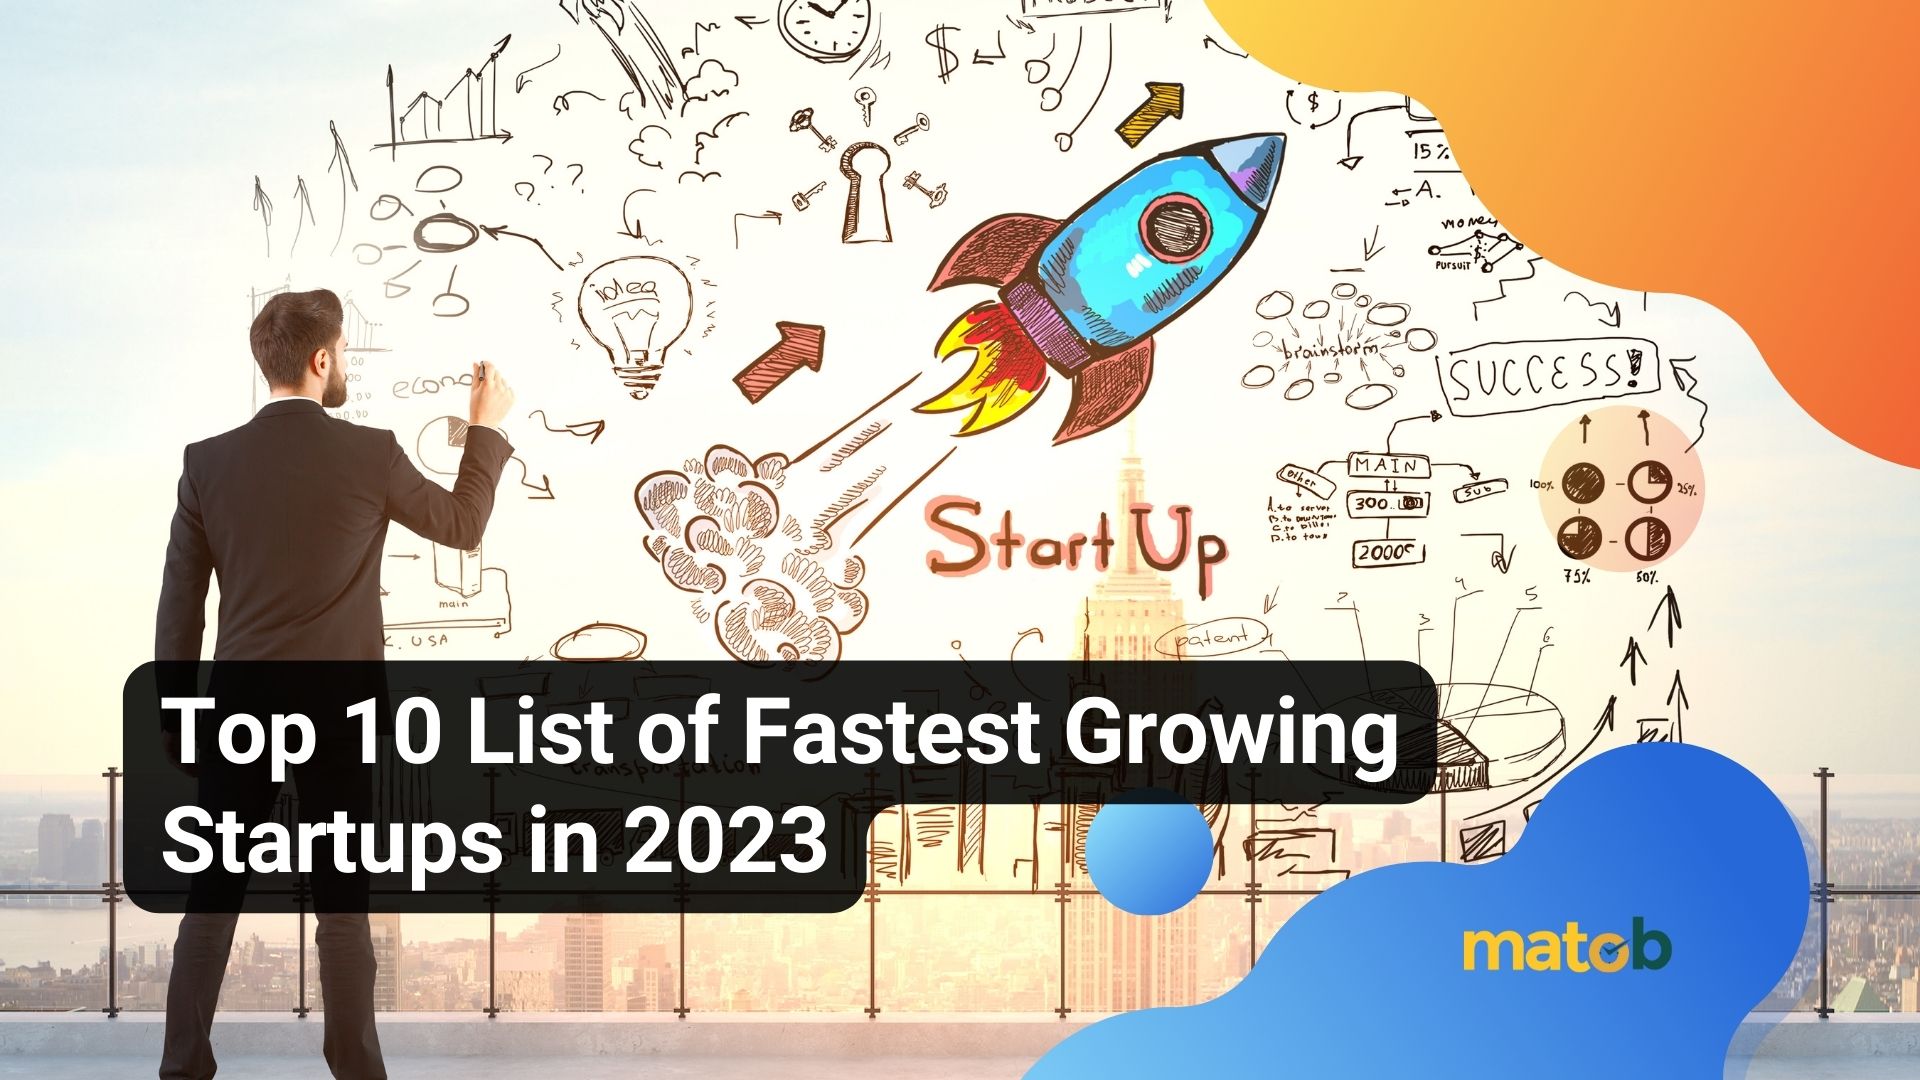 Top 10 List of Fastest Growing Startups in 2023